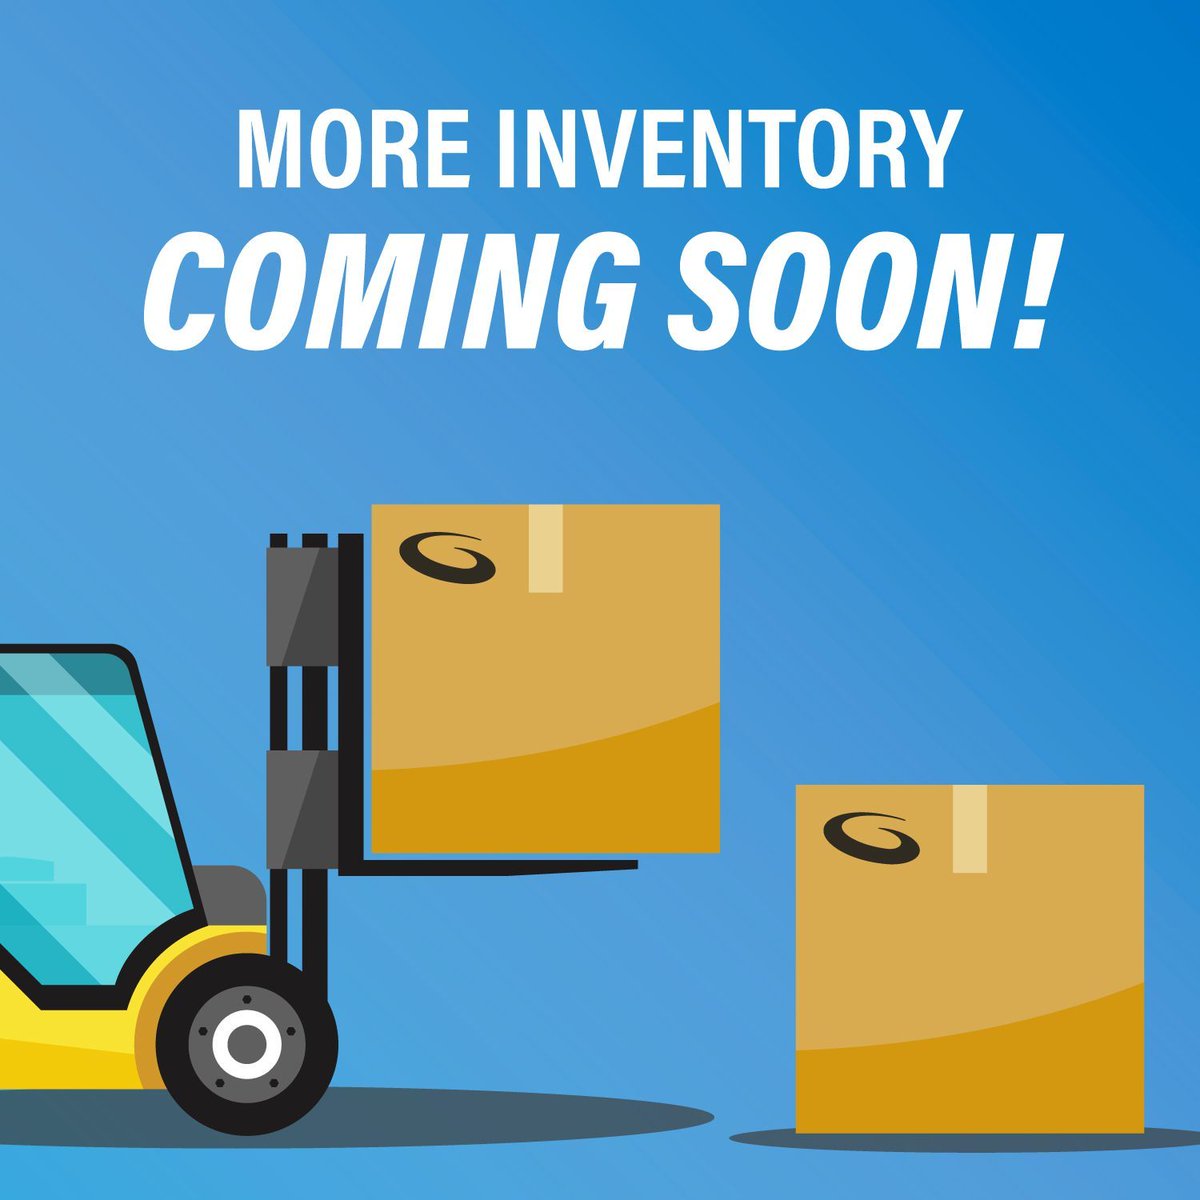 🚚 Exciting News! 🚚 More inventory is on its way to Goldline Curling! 🥌 Be sure to check out our website at GoldlineCurling.com to get your hands on the latest and greatest curling gear and accessories. Don't miss out on what's coming! Stay tuned for updates.